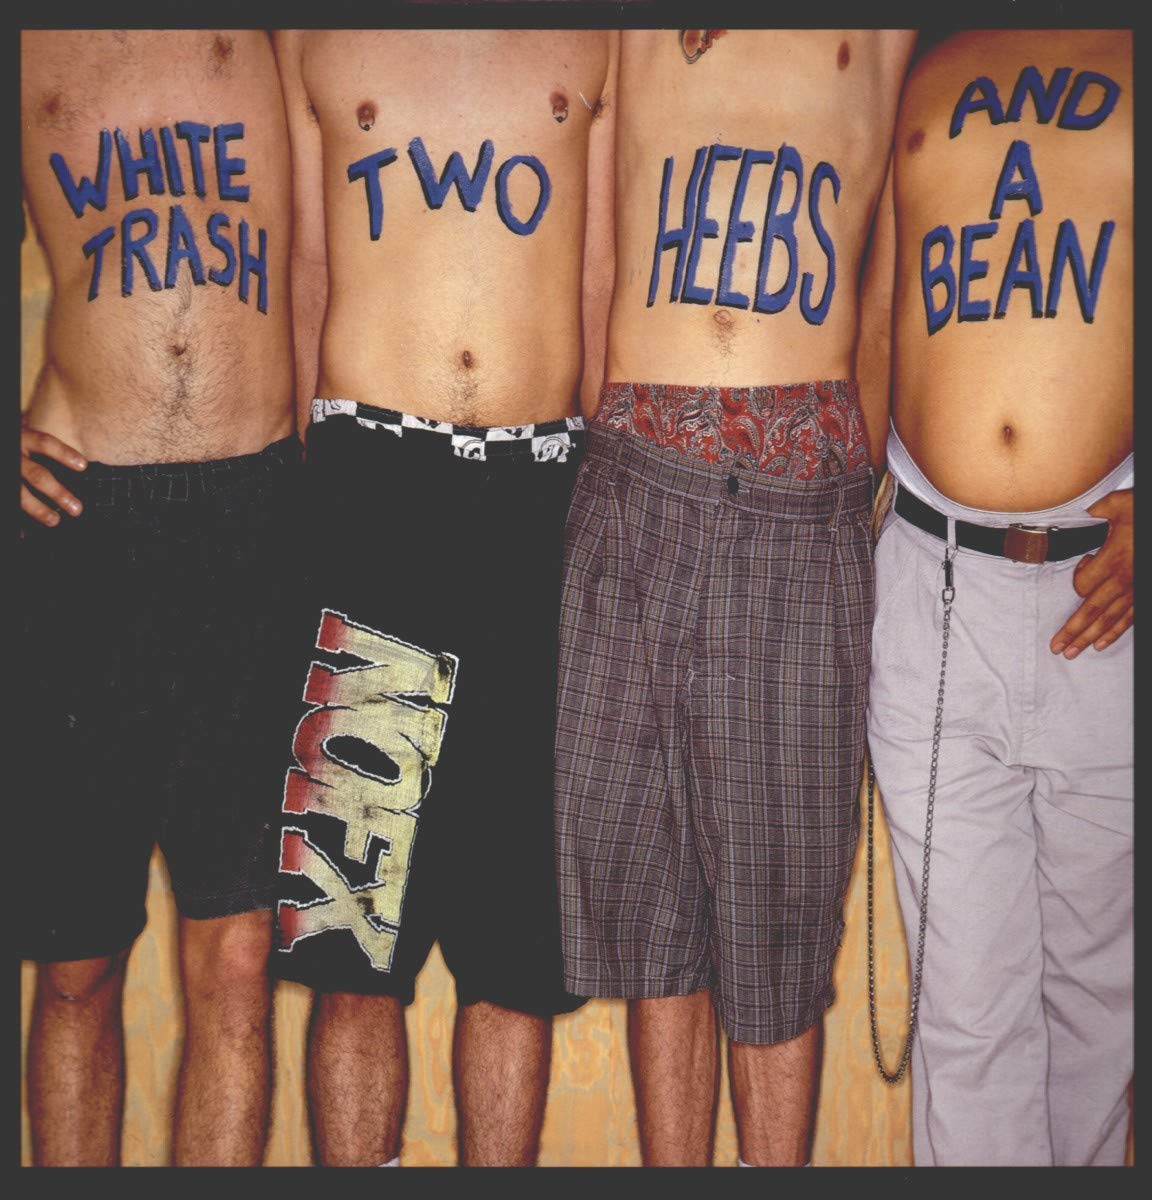 NOFX - WHITE TRASH TWO HEEBS AND A BEAN LP